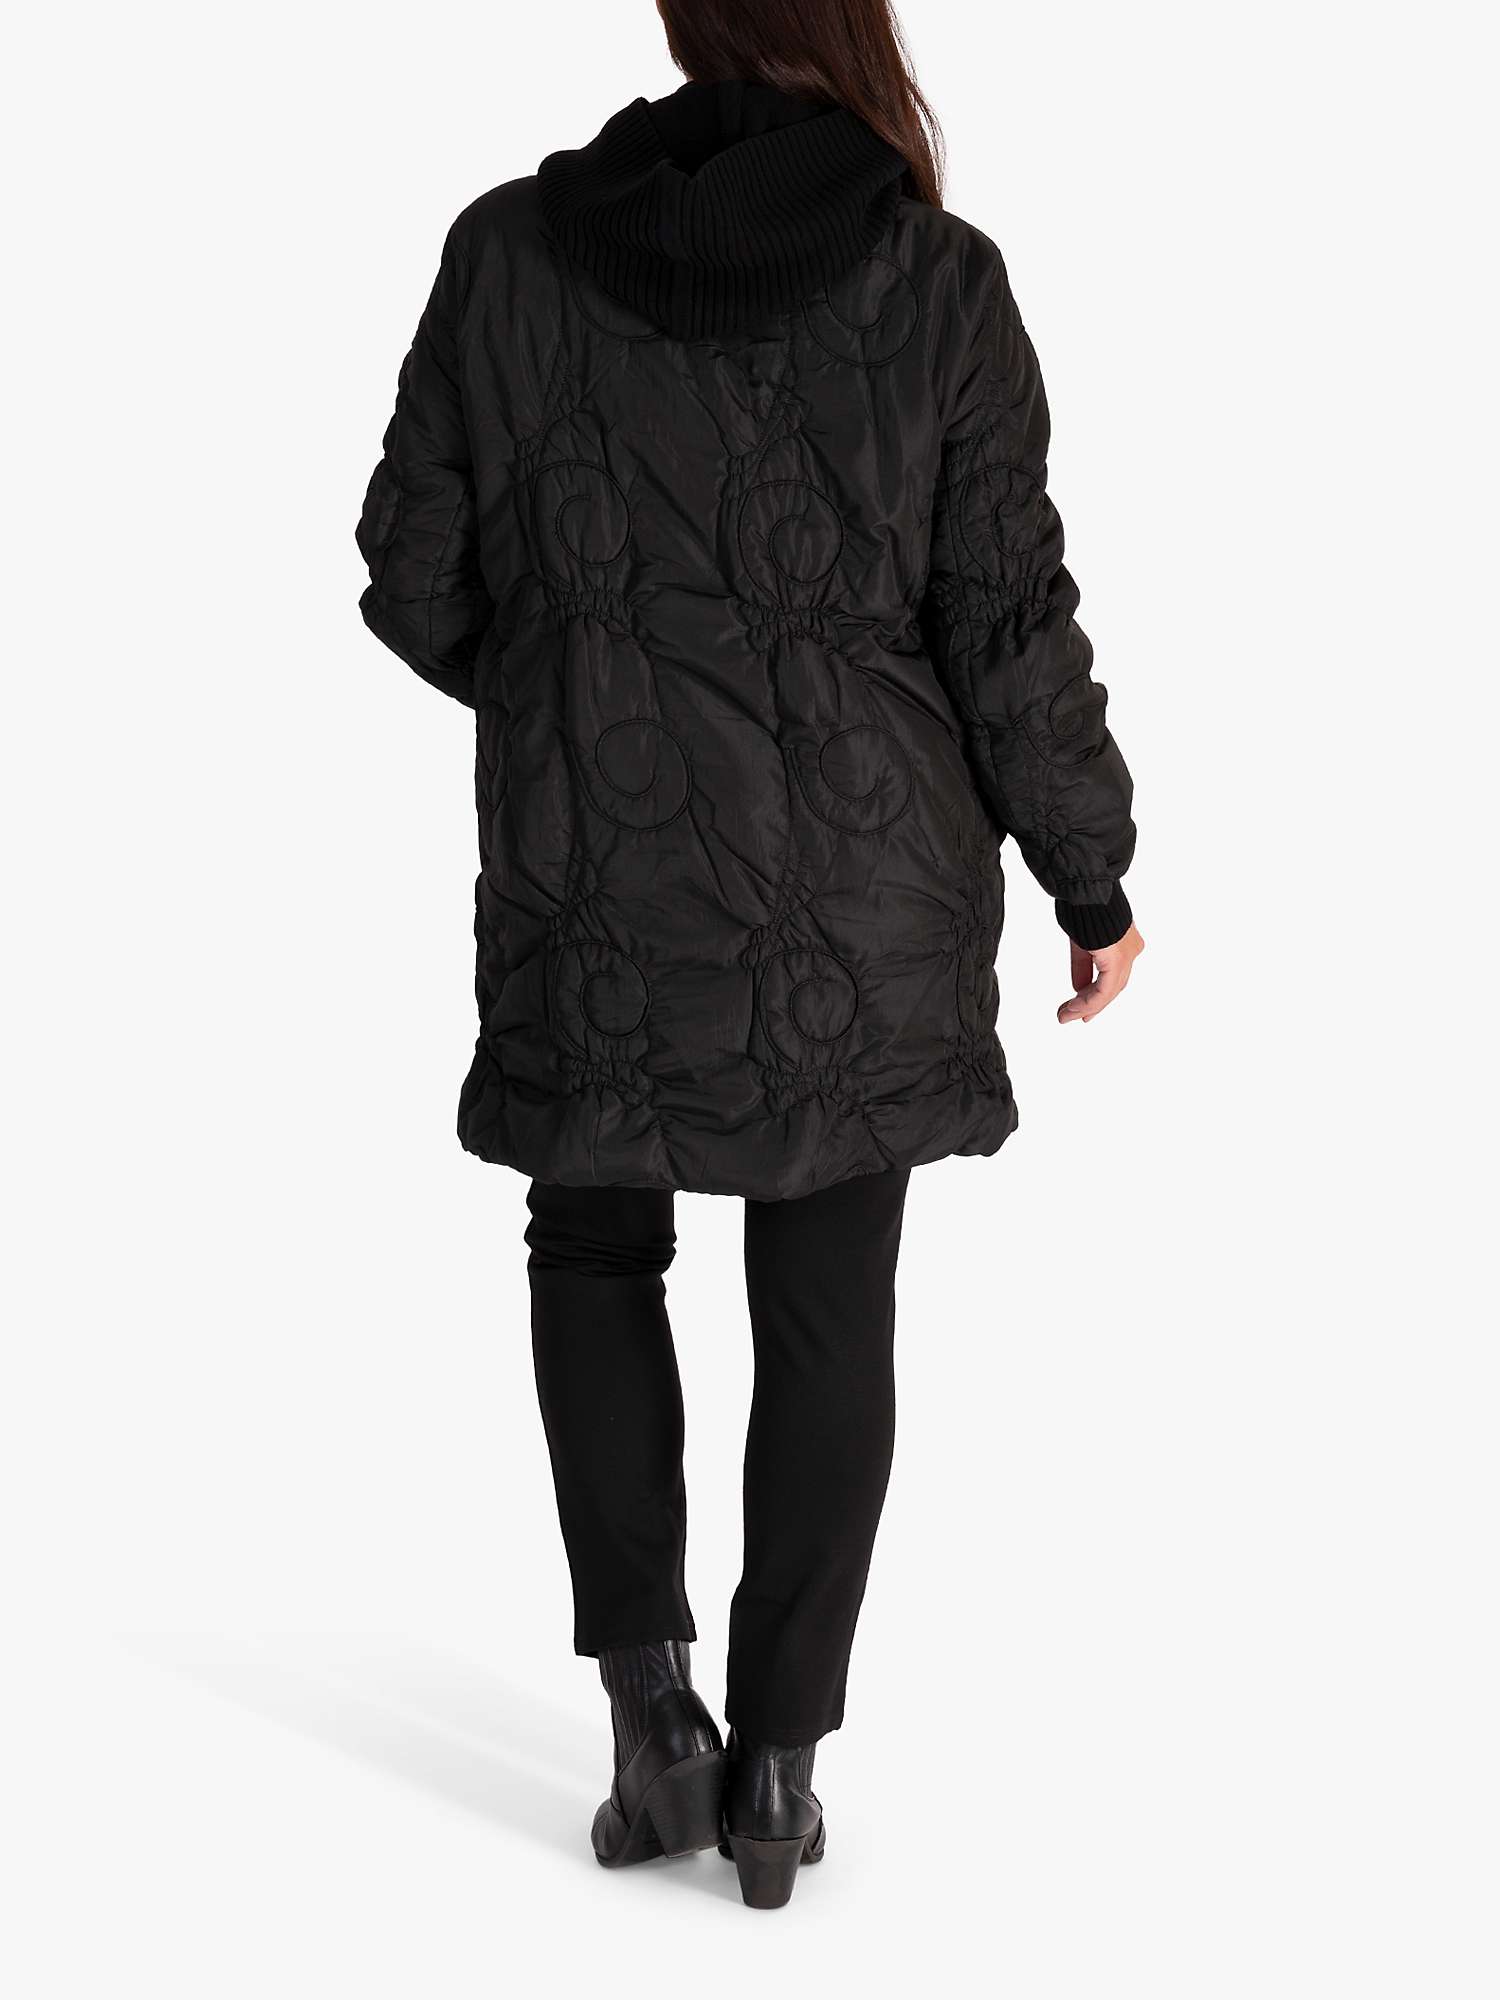 Buy chesca Quilted Embroidered Coat Online at johnlewis.com